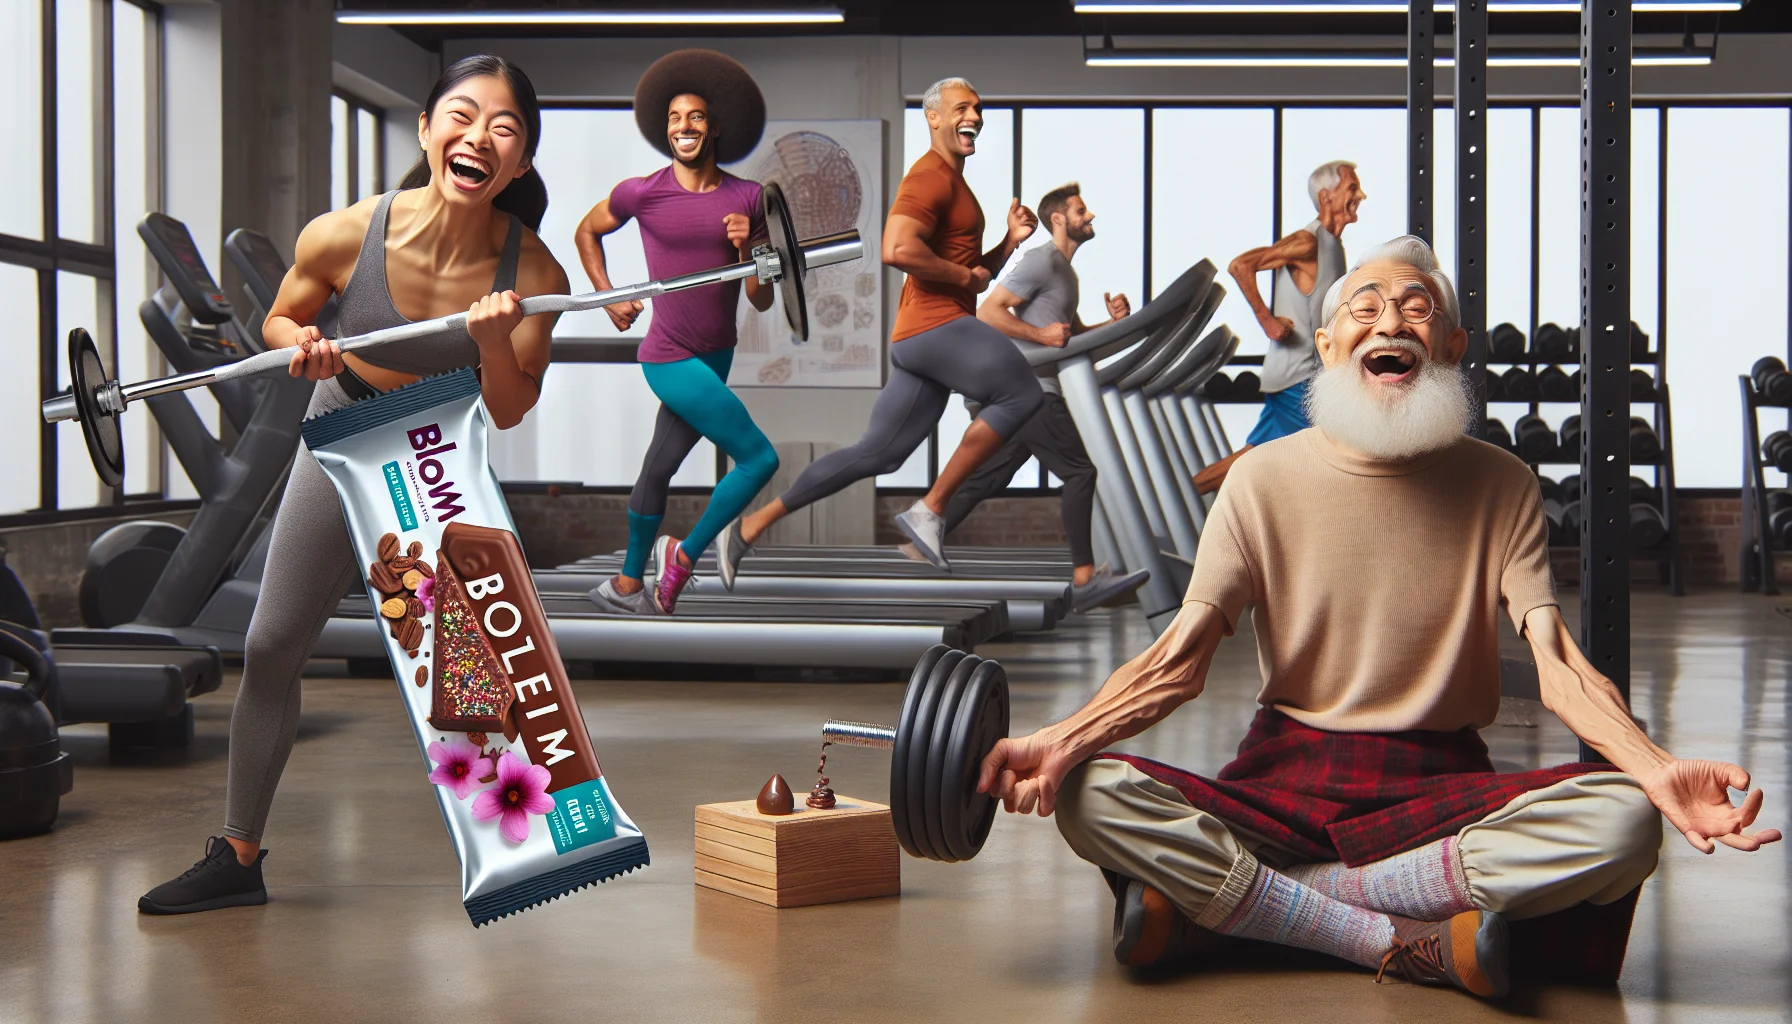 Create a lively and comedic image centered around Bloom Protein Bars. Picture this: A gym setting with diverse individuals of different descents and genders engaged in various fitness activities. One person, a South Asian female powerlifter, is lifting a gigantic Bloom Protein Bar as if it's a barbell, grinning broadly. A Hispanic male marathon runner is nearby, sprinting on a treadmill while comically chomping on the protein bar. An elderly Caucasian man in yoga attire is seated, laughing wholeheartedly, as he balances a Bloom Protein Bar on his head during a meditation pose. The environment should be reflective of an active and healthy lifestyle, subtly promoting the use of supplements for sports.